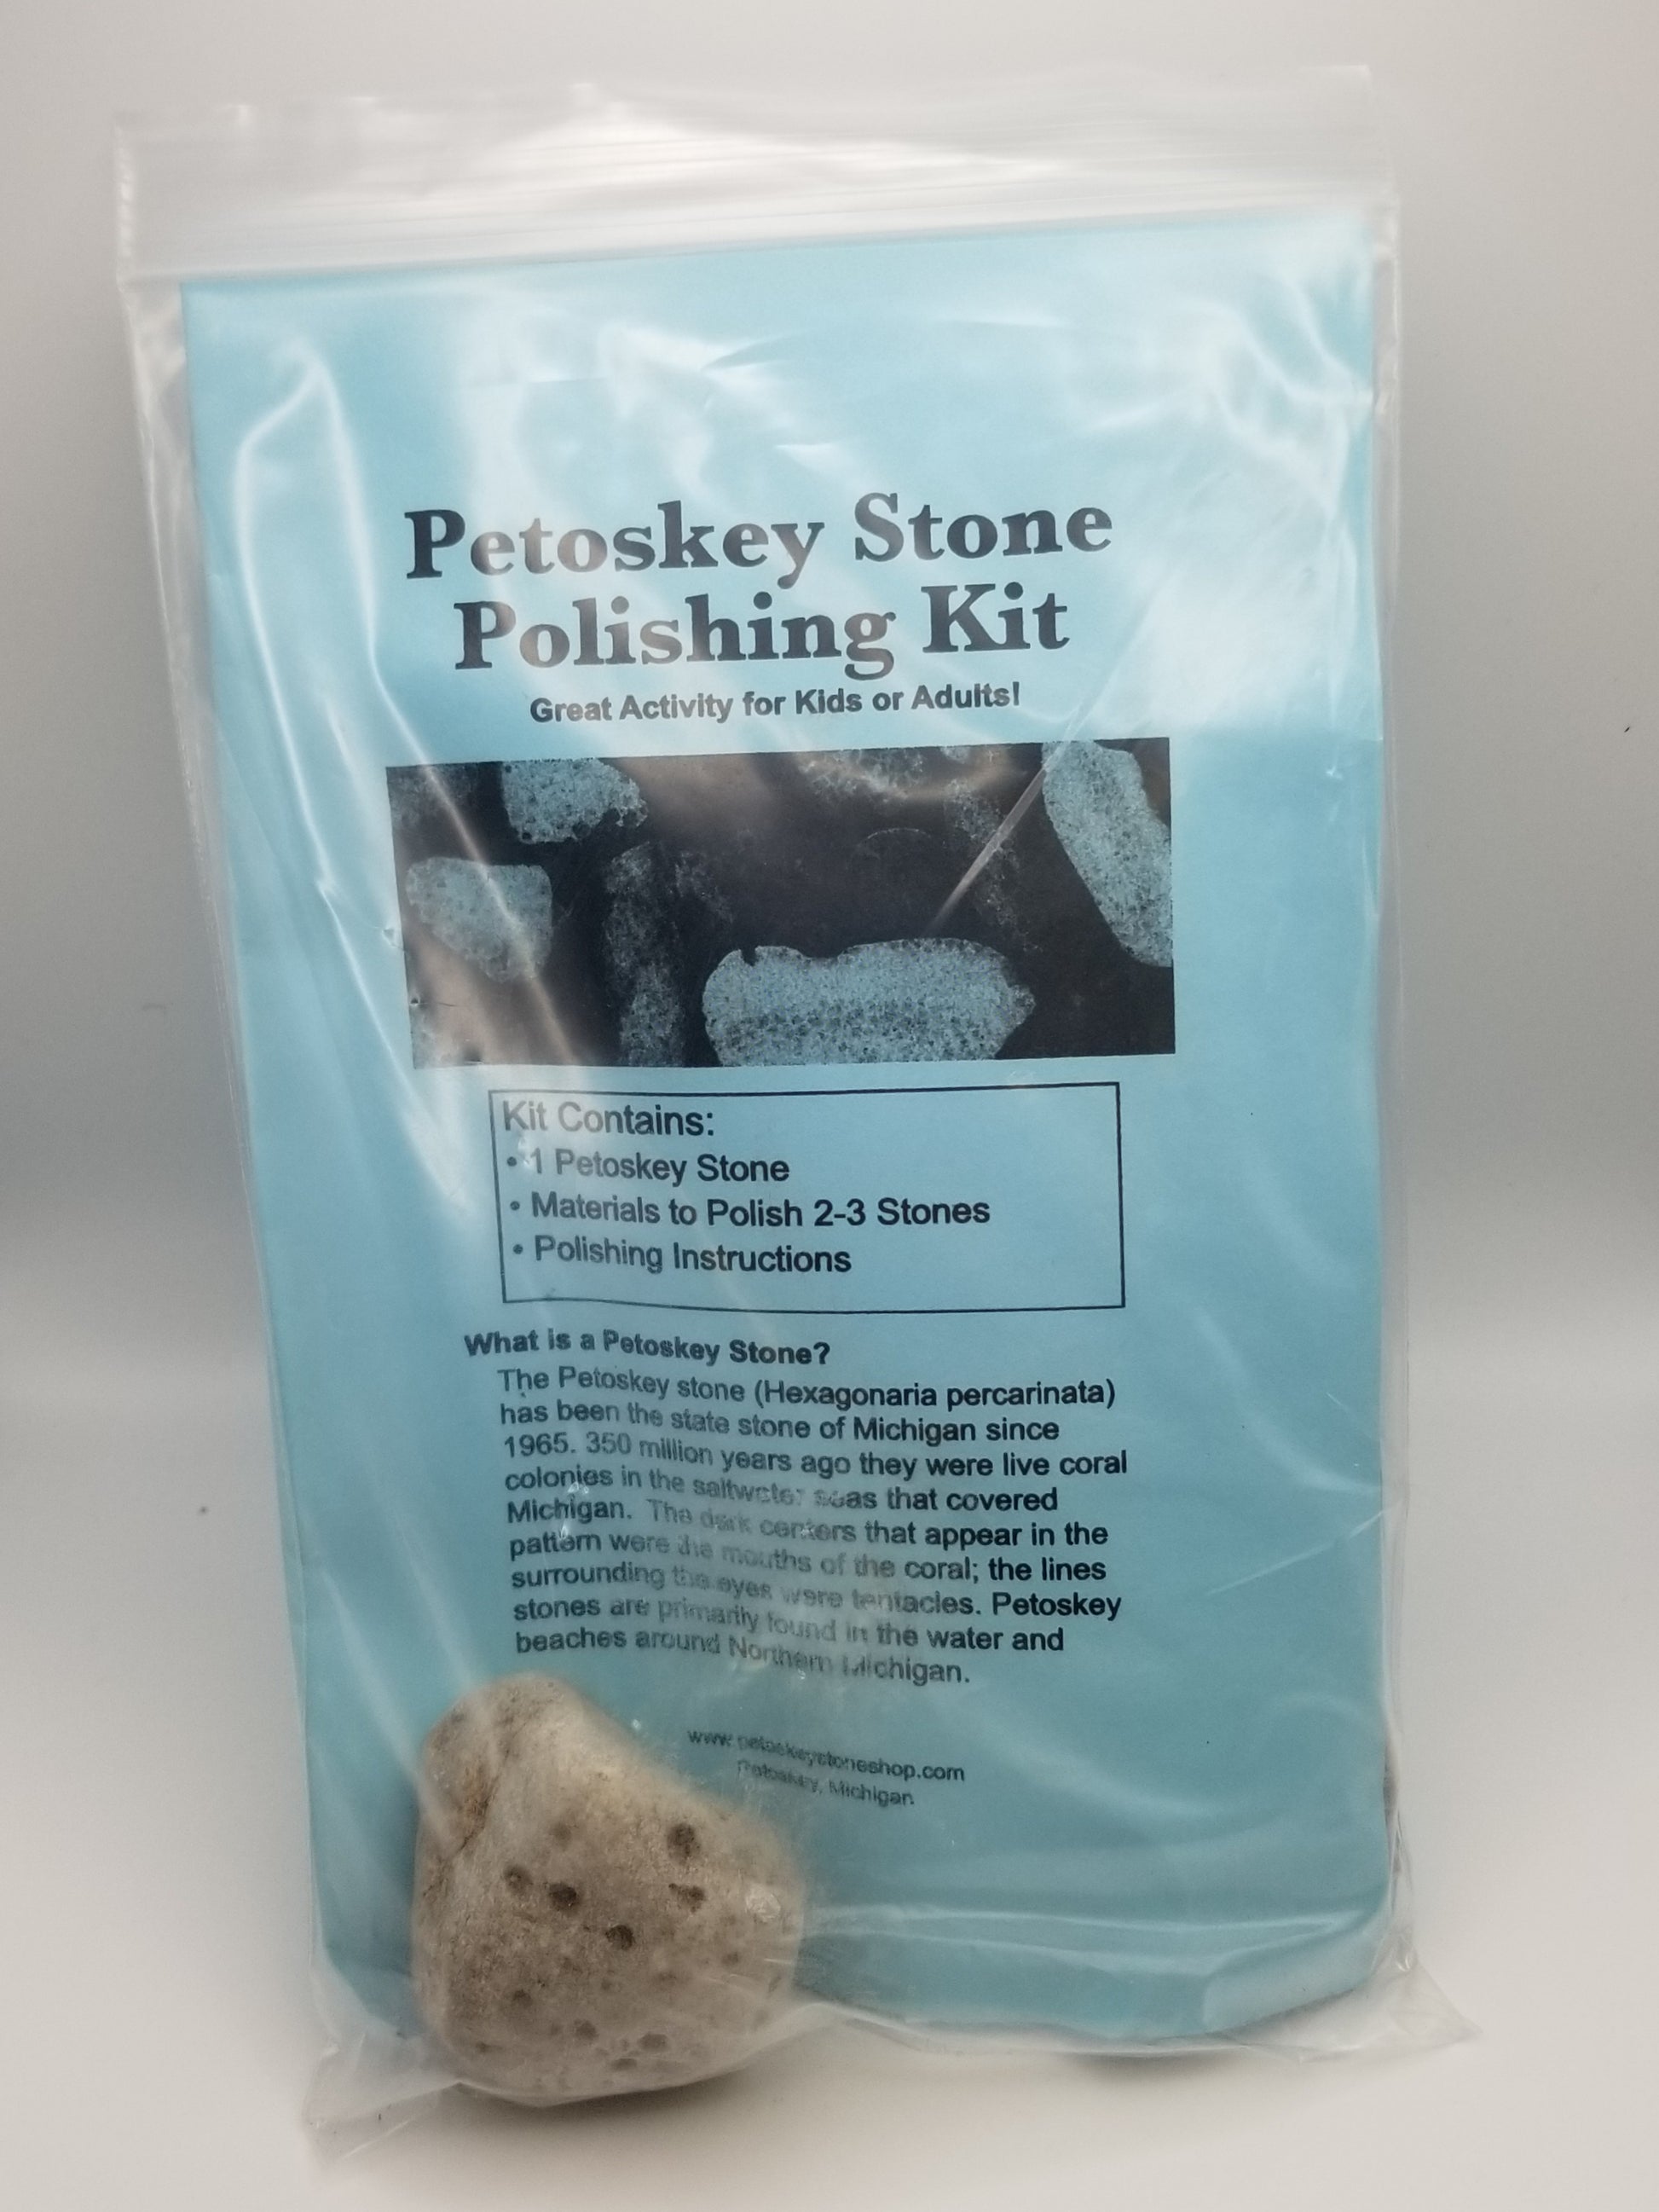 A petoskey stone polishing kit sitting upright on a white background. The kit instructions are a light blue color and the raw petoskey stone to be polished is inside the kit bag on the bottom left. Stone clearly has petoskey stone indentations.